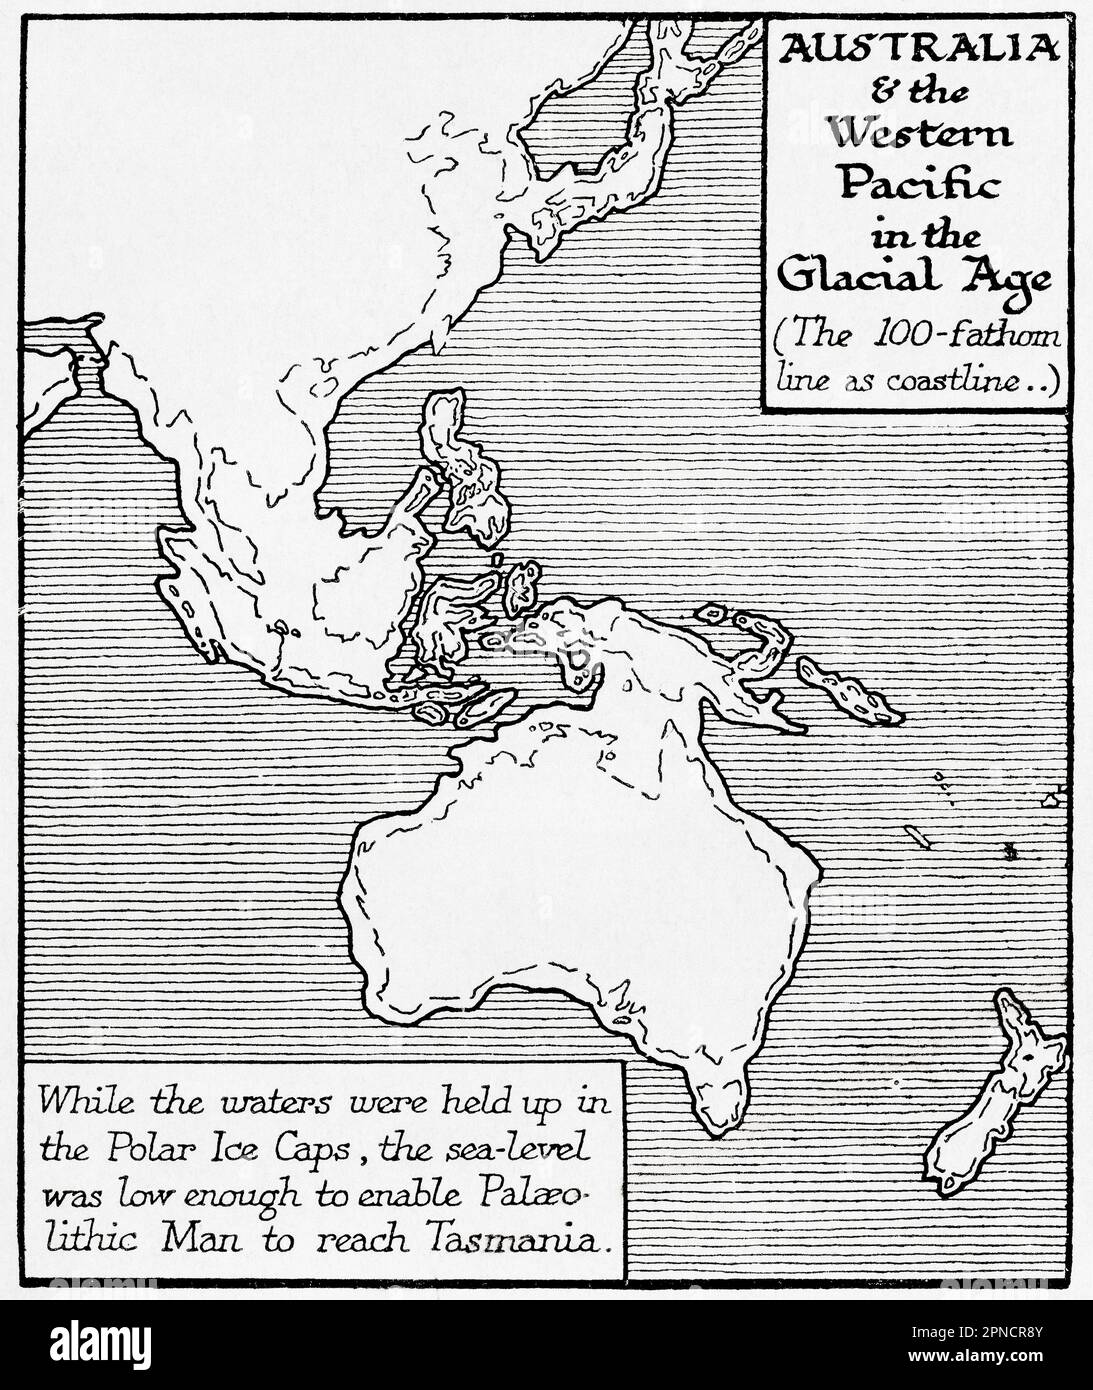 Map of Australia and the Western Pacific in the Glacial Age.  While the waters were held up in the Polar Ice Caps, the sea level was low enough to enable Palaeolithic man to reach Tasmania.  From the book Outline of History by H.G. Wells, published 1920. Stock Photo